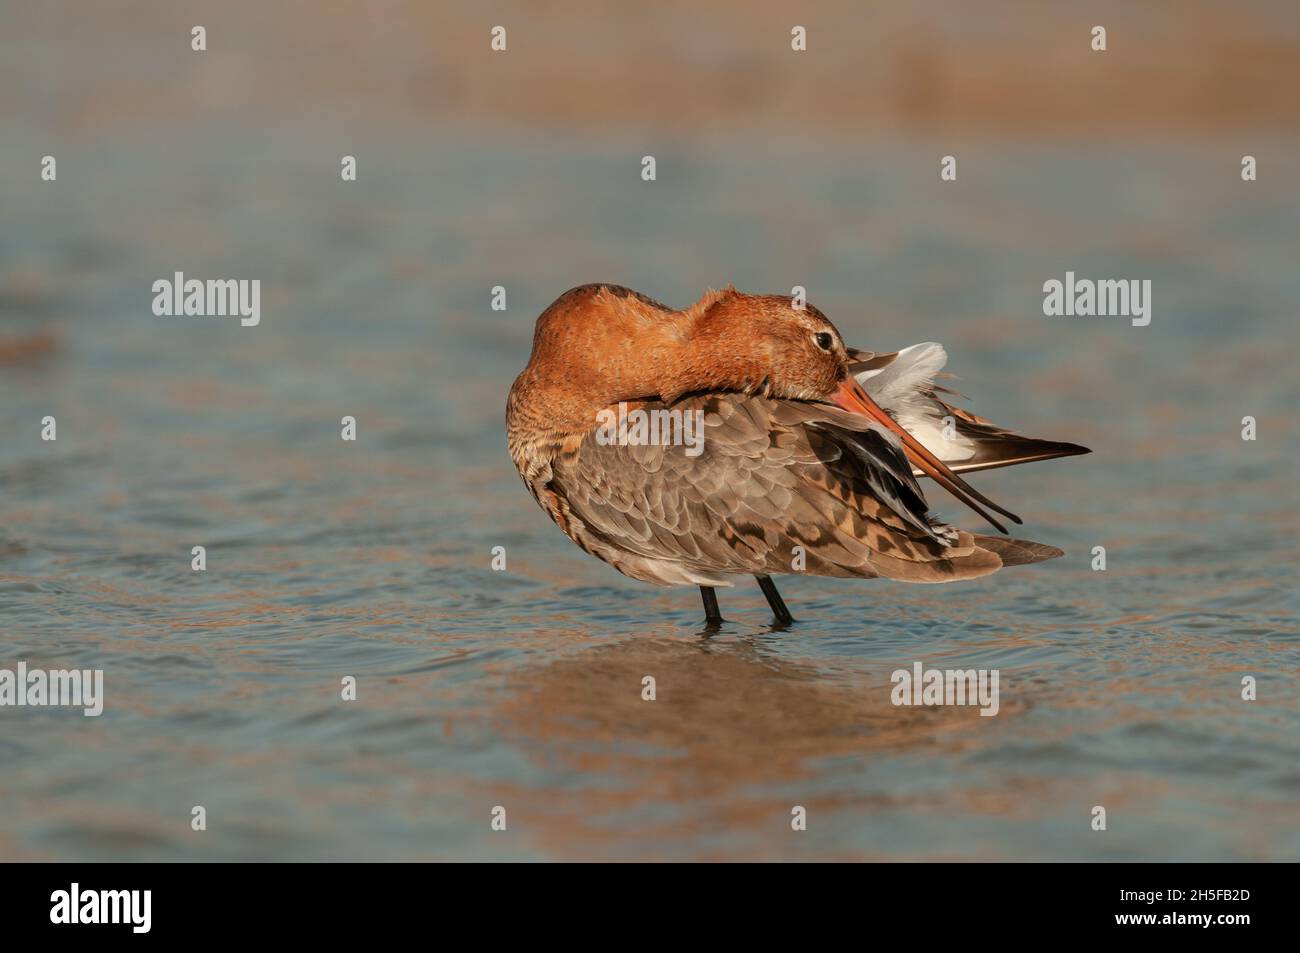 Black-tailed godwit, Limosa limosa, a solitary bird in the water preening its feathers. Stock Photo